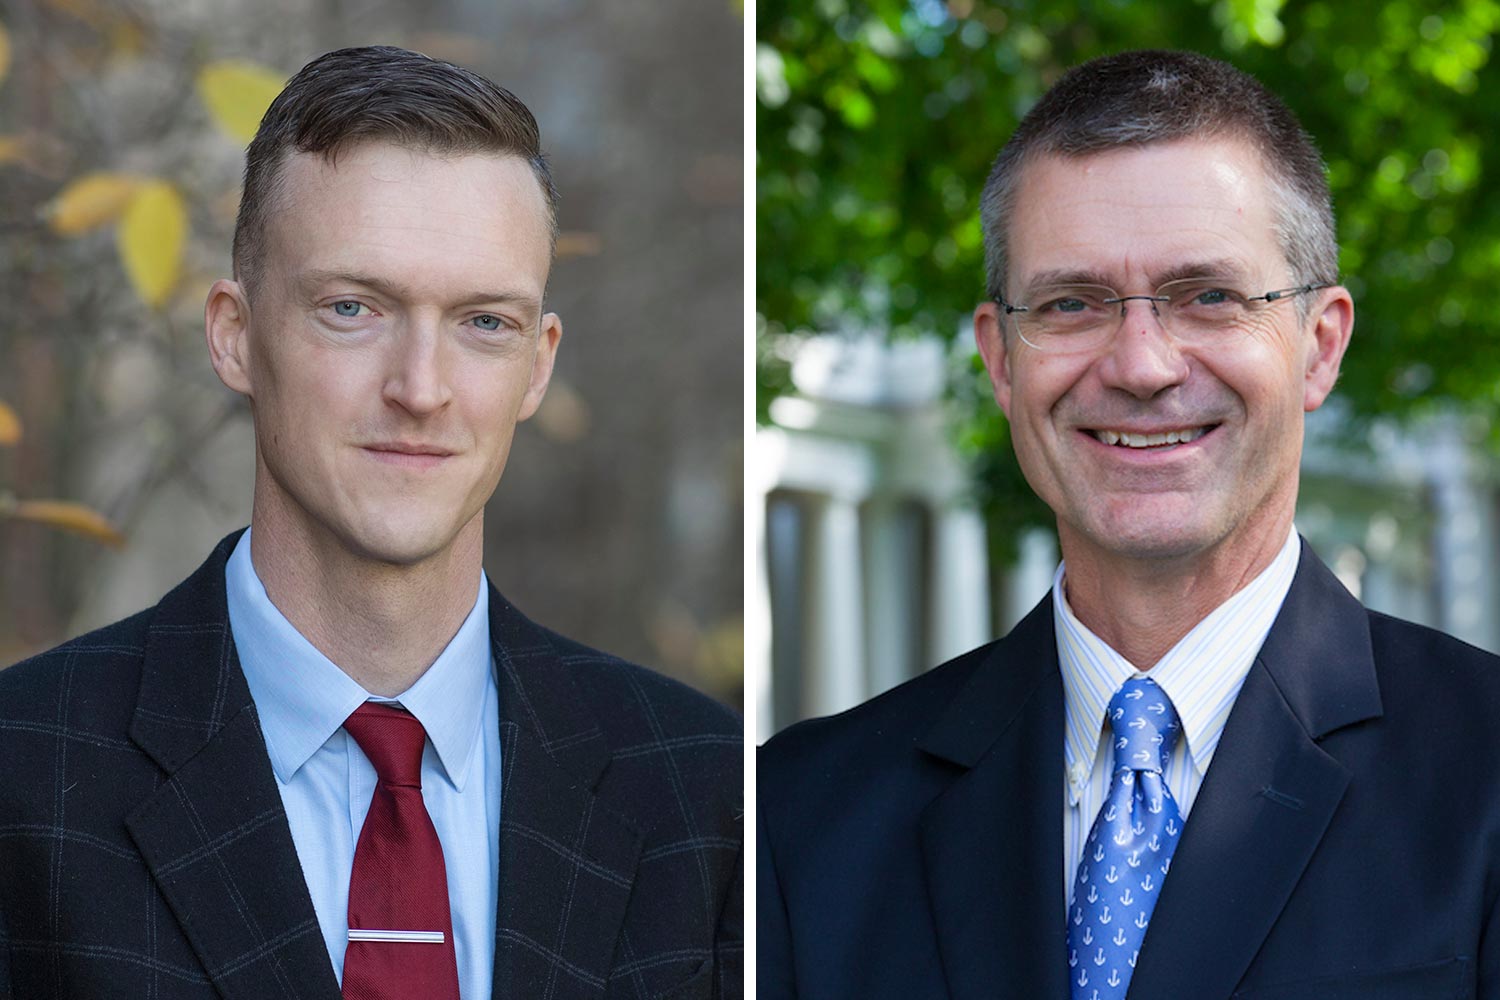 University of Virginia policy professors Philip Potter and Allan Stam